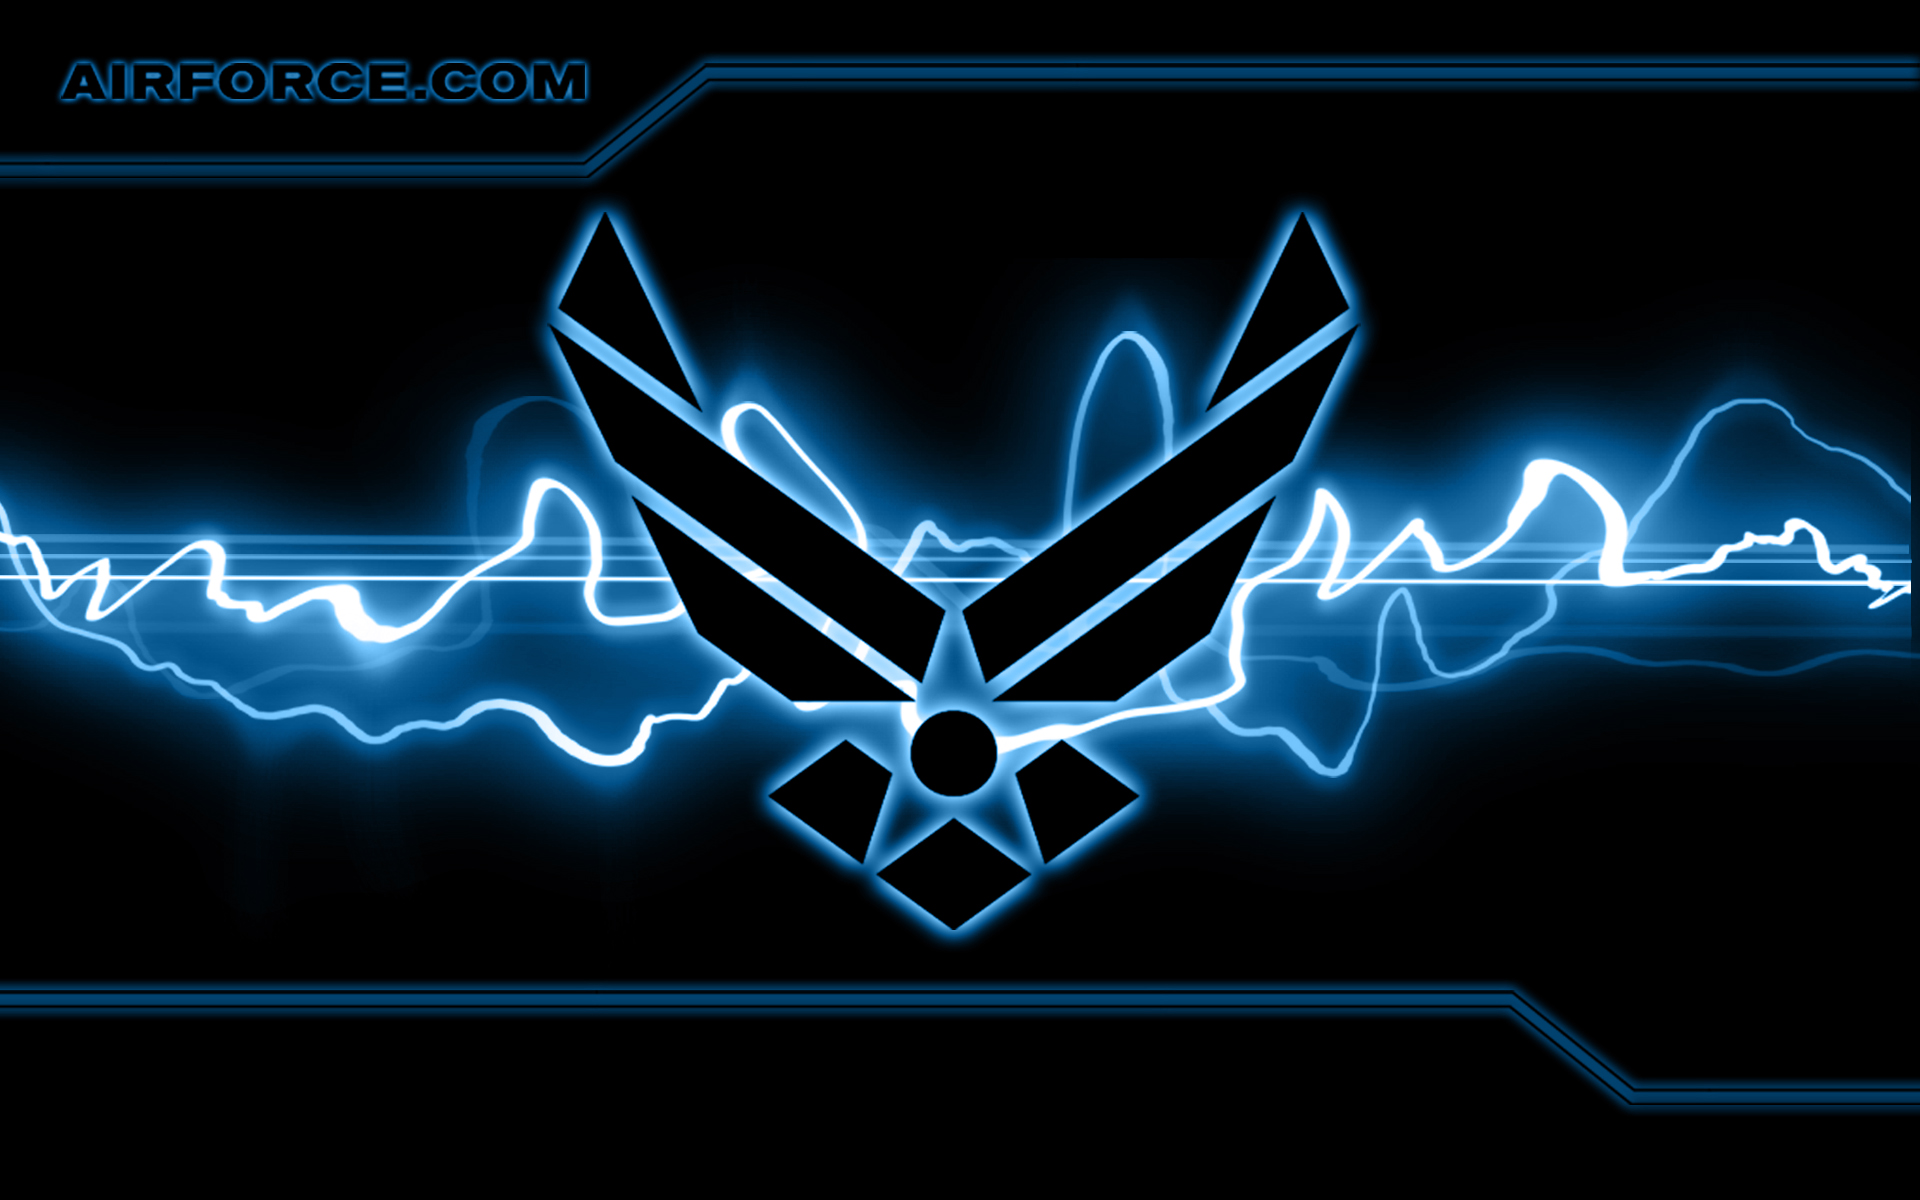 related pictures air force logo hd wallpaper Car Pictures